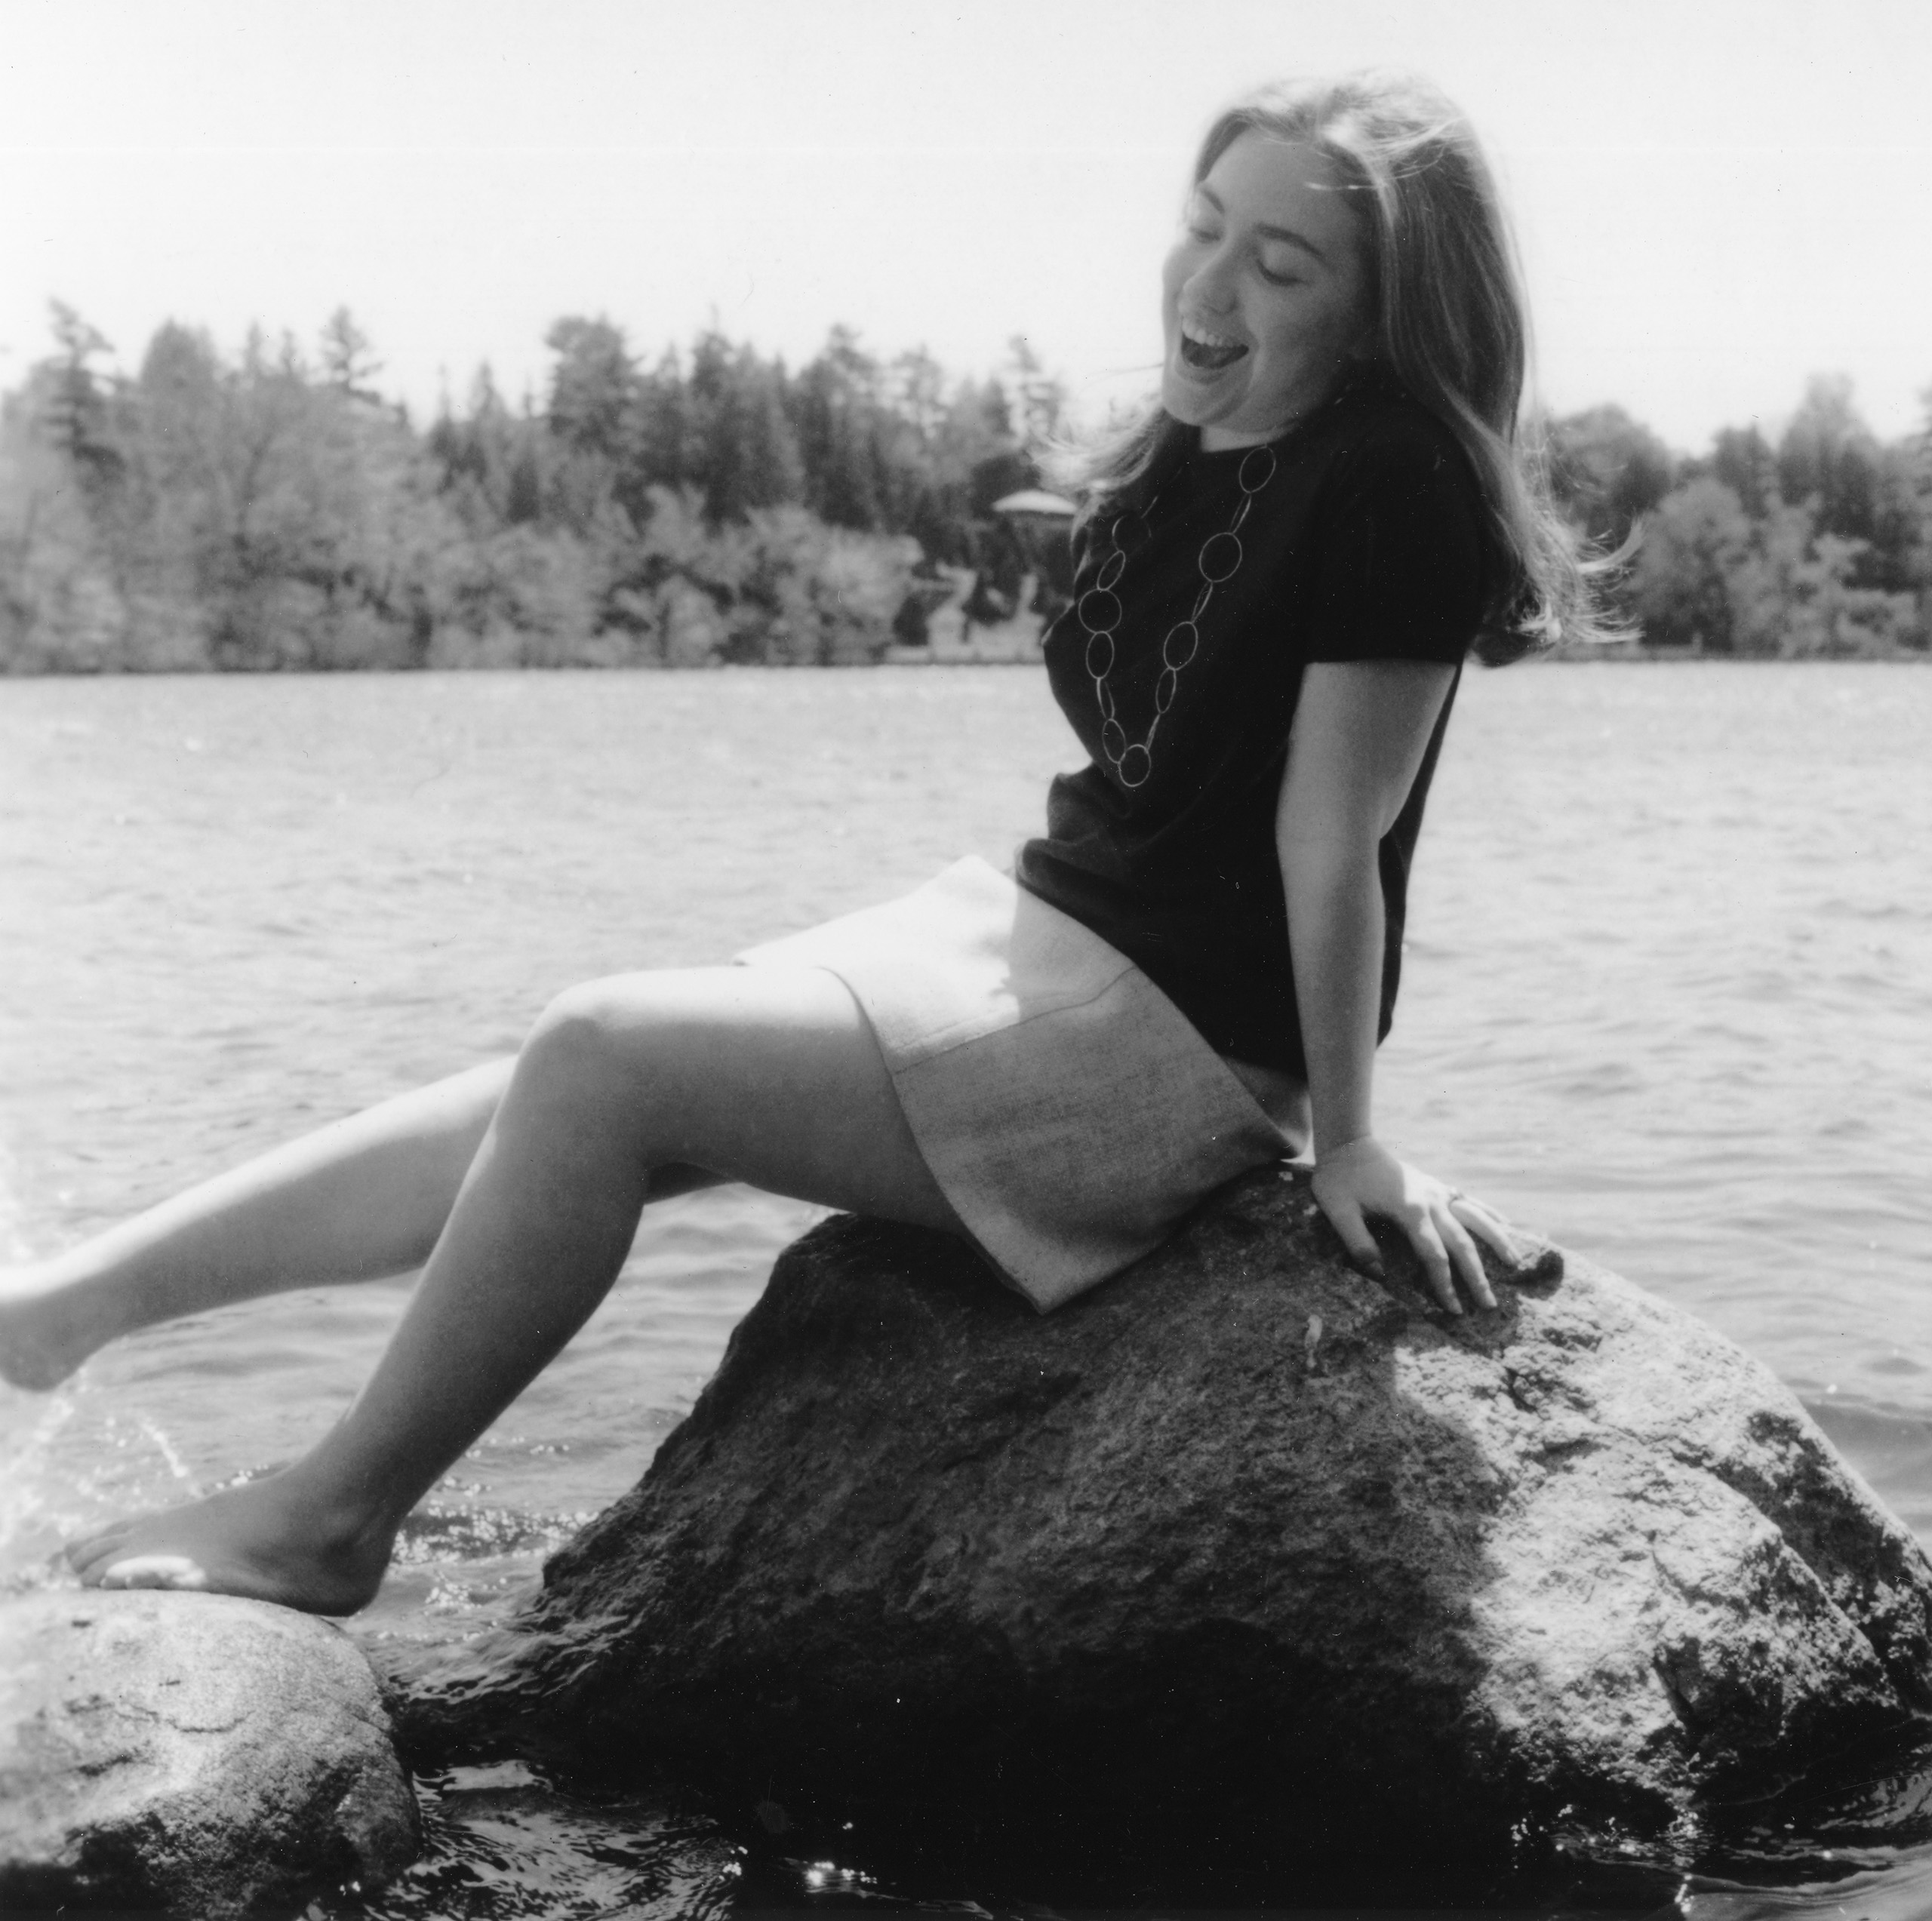 Hillary at Lake Waban on the Wellesley College Campus, 1969.